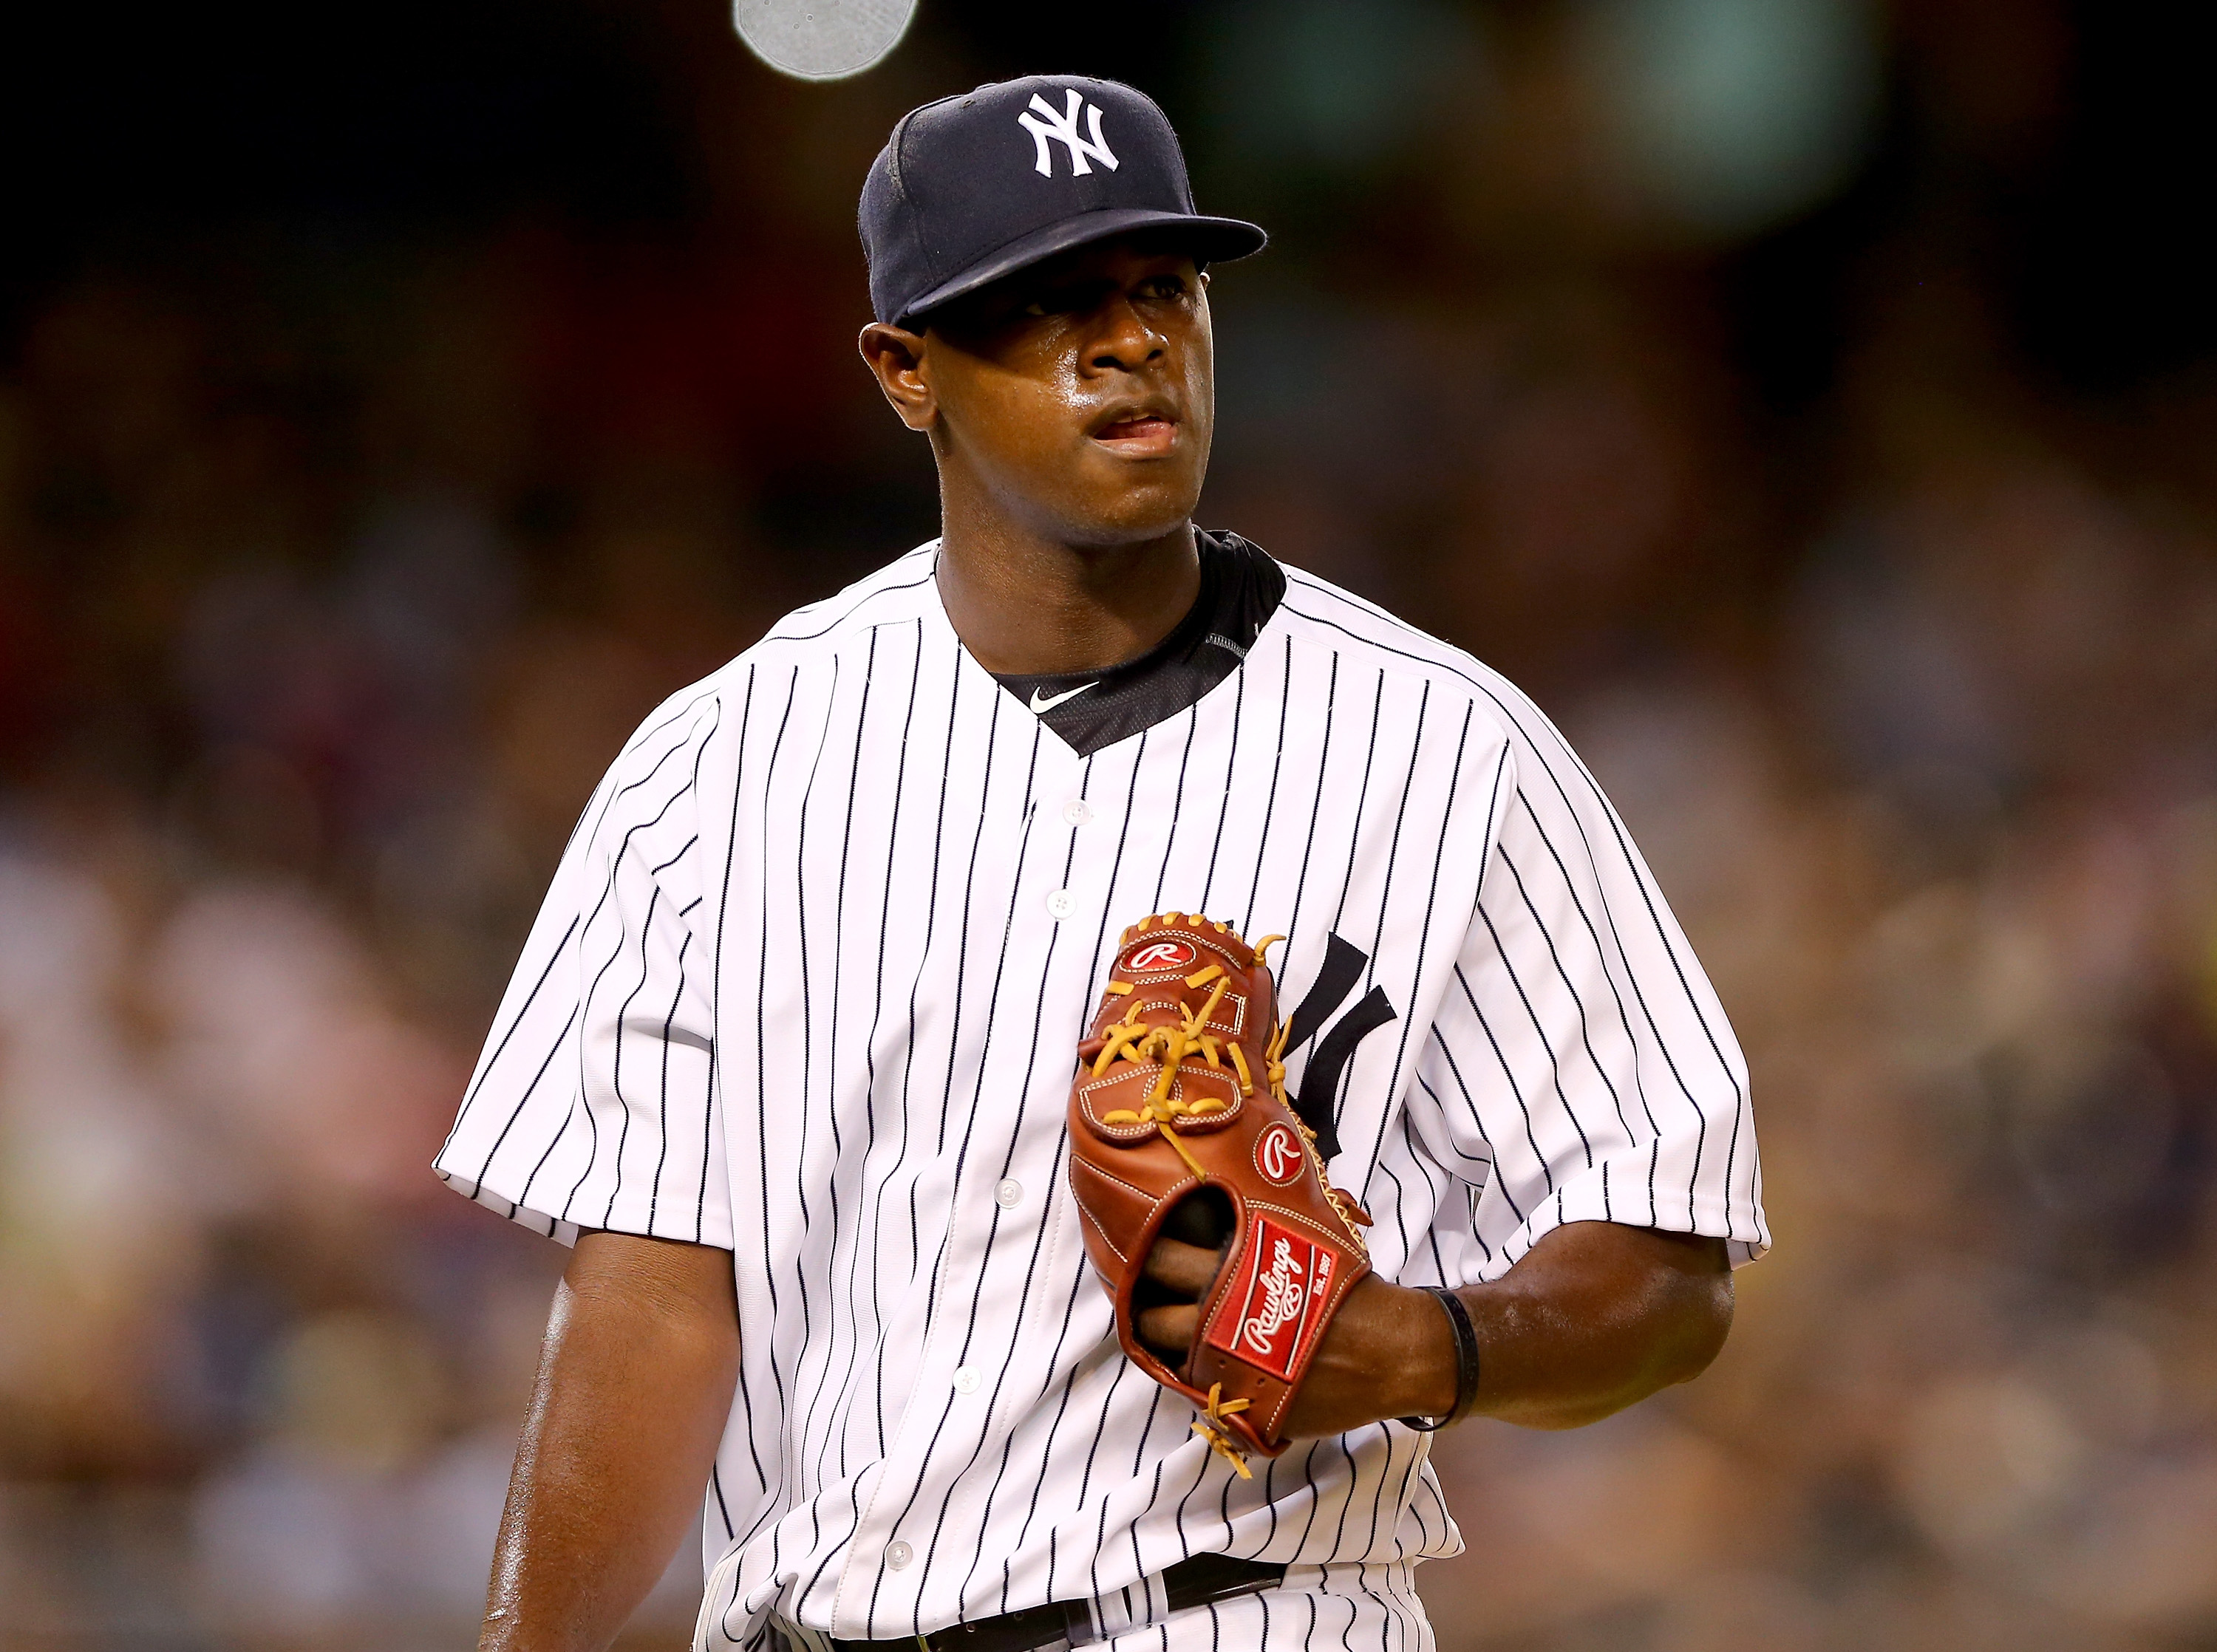 Luis Severino showed composure and confidence in his first start against Boston (Getty).